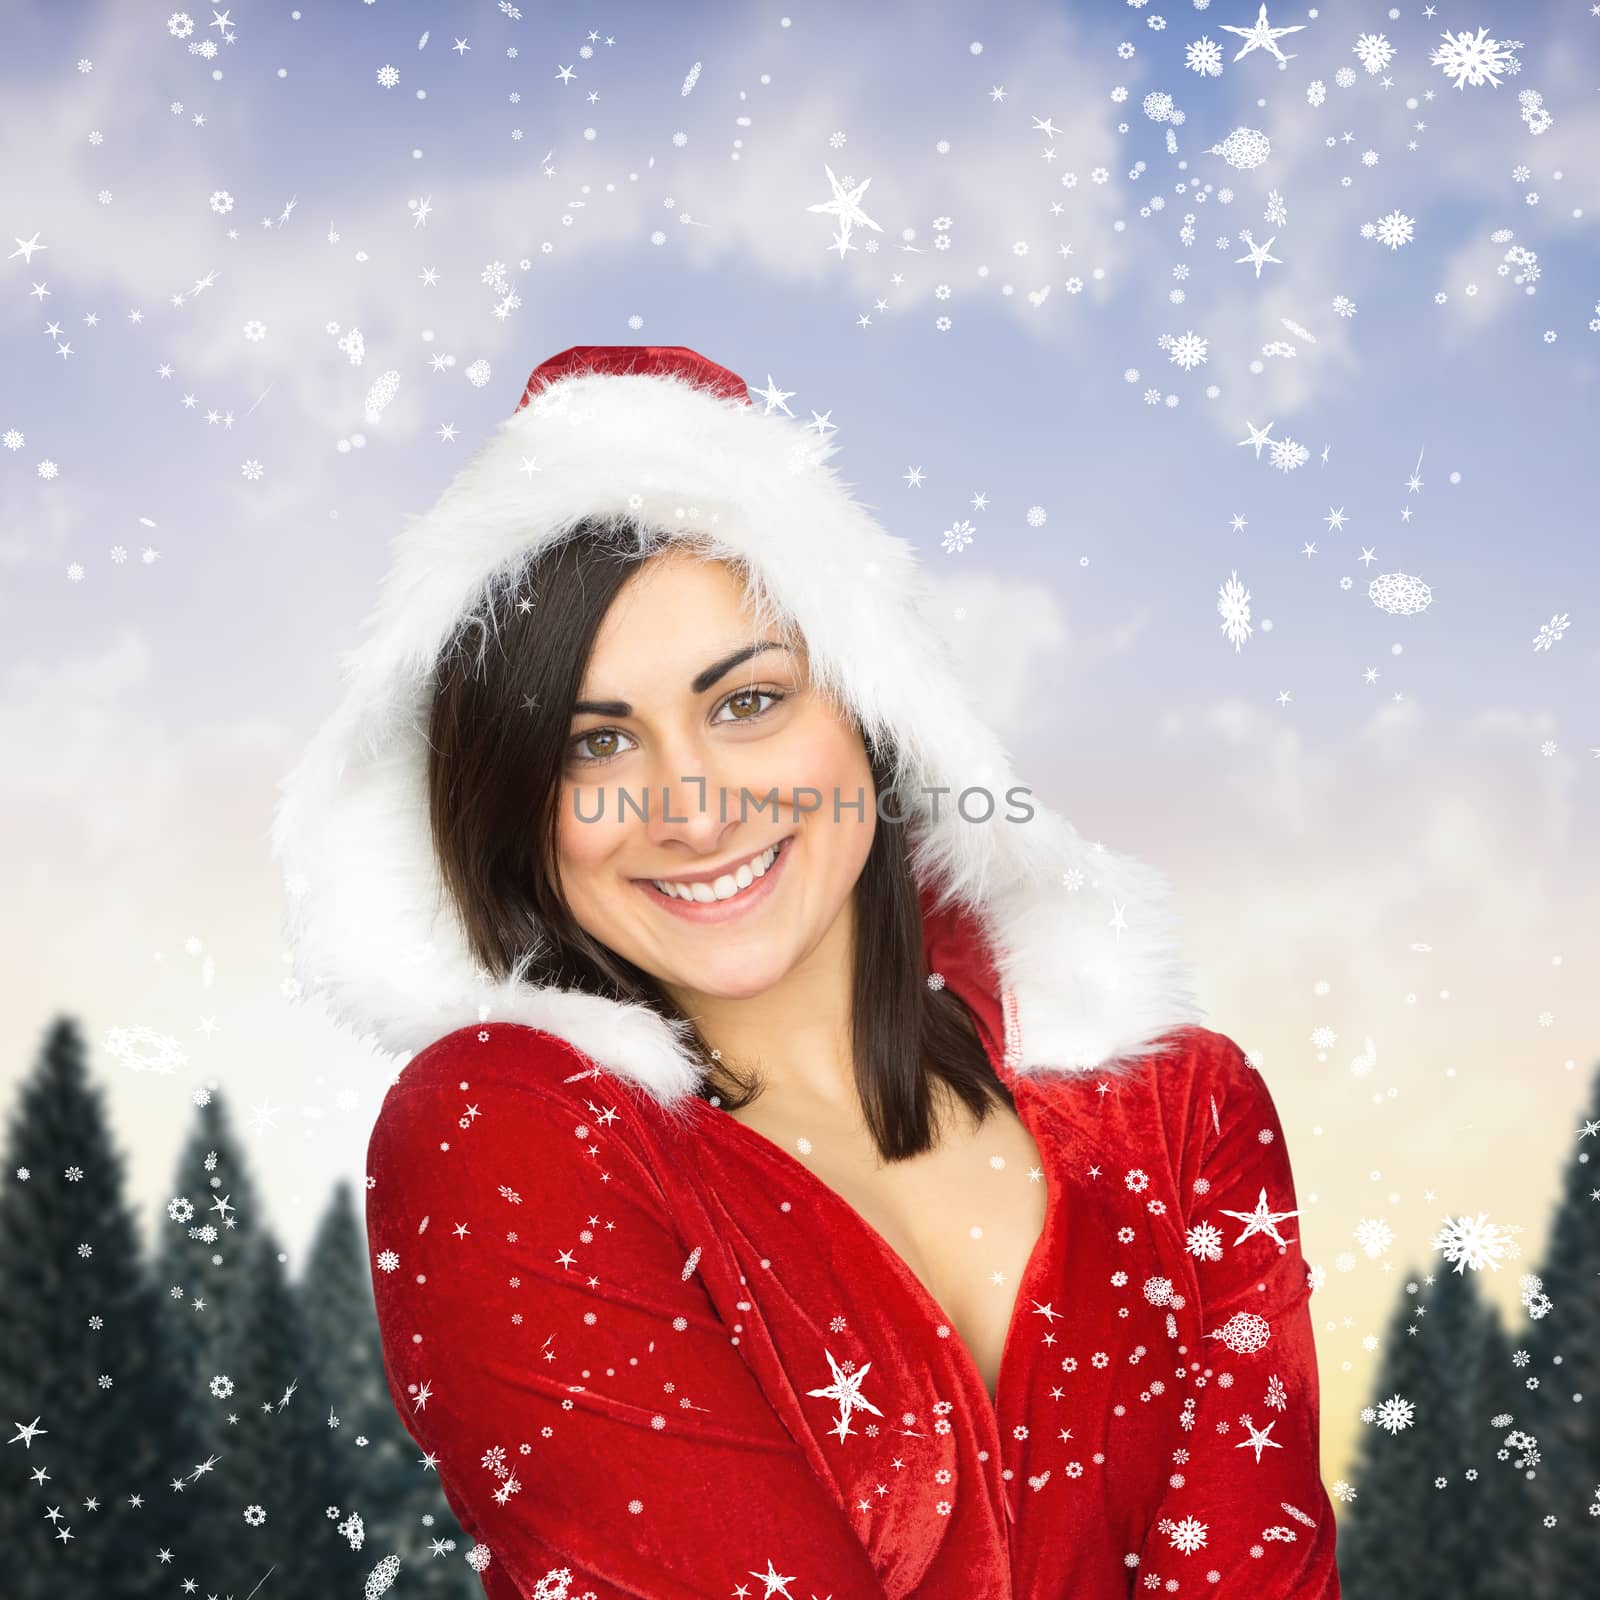 Pretty girl smiling in santa outfit against snowy landscape with fir trees